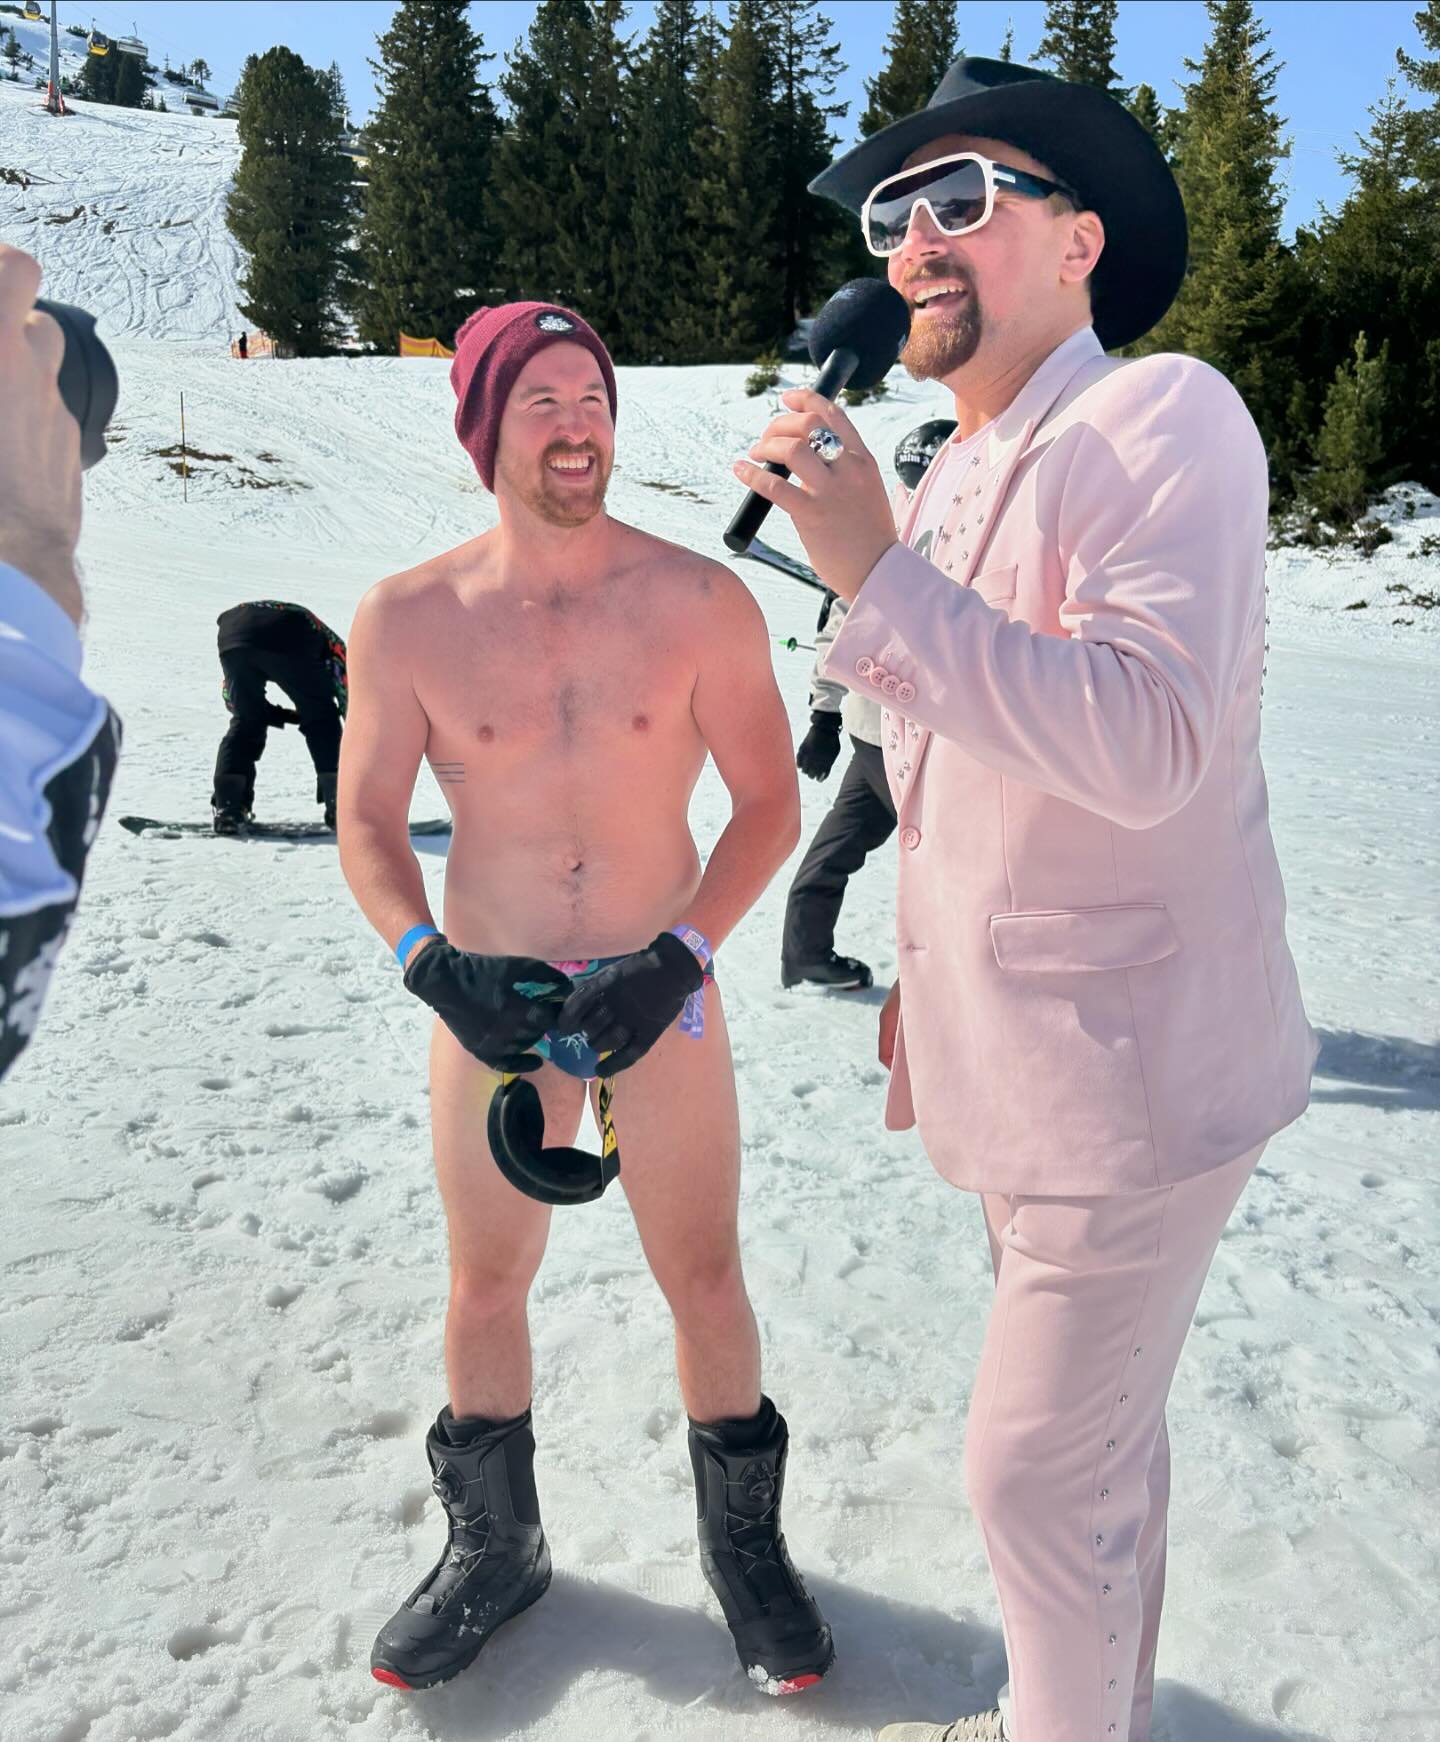 A sinful afternoon taking chairlift confessions at @snowbombingofficial ⛷️ 😈 #snowbombing #snowbombingfestival #austria #skiing #comedy